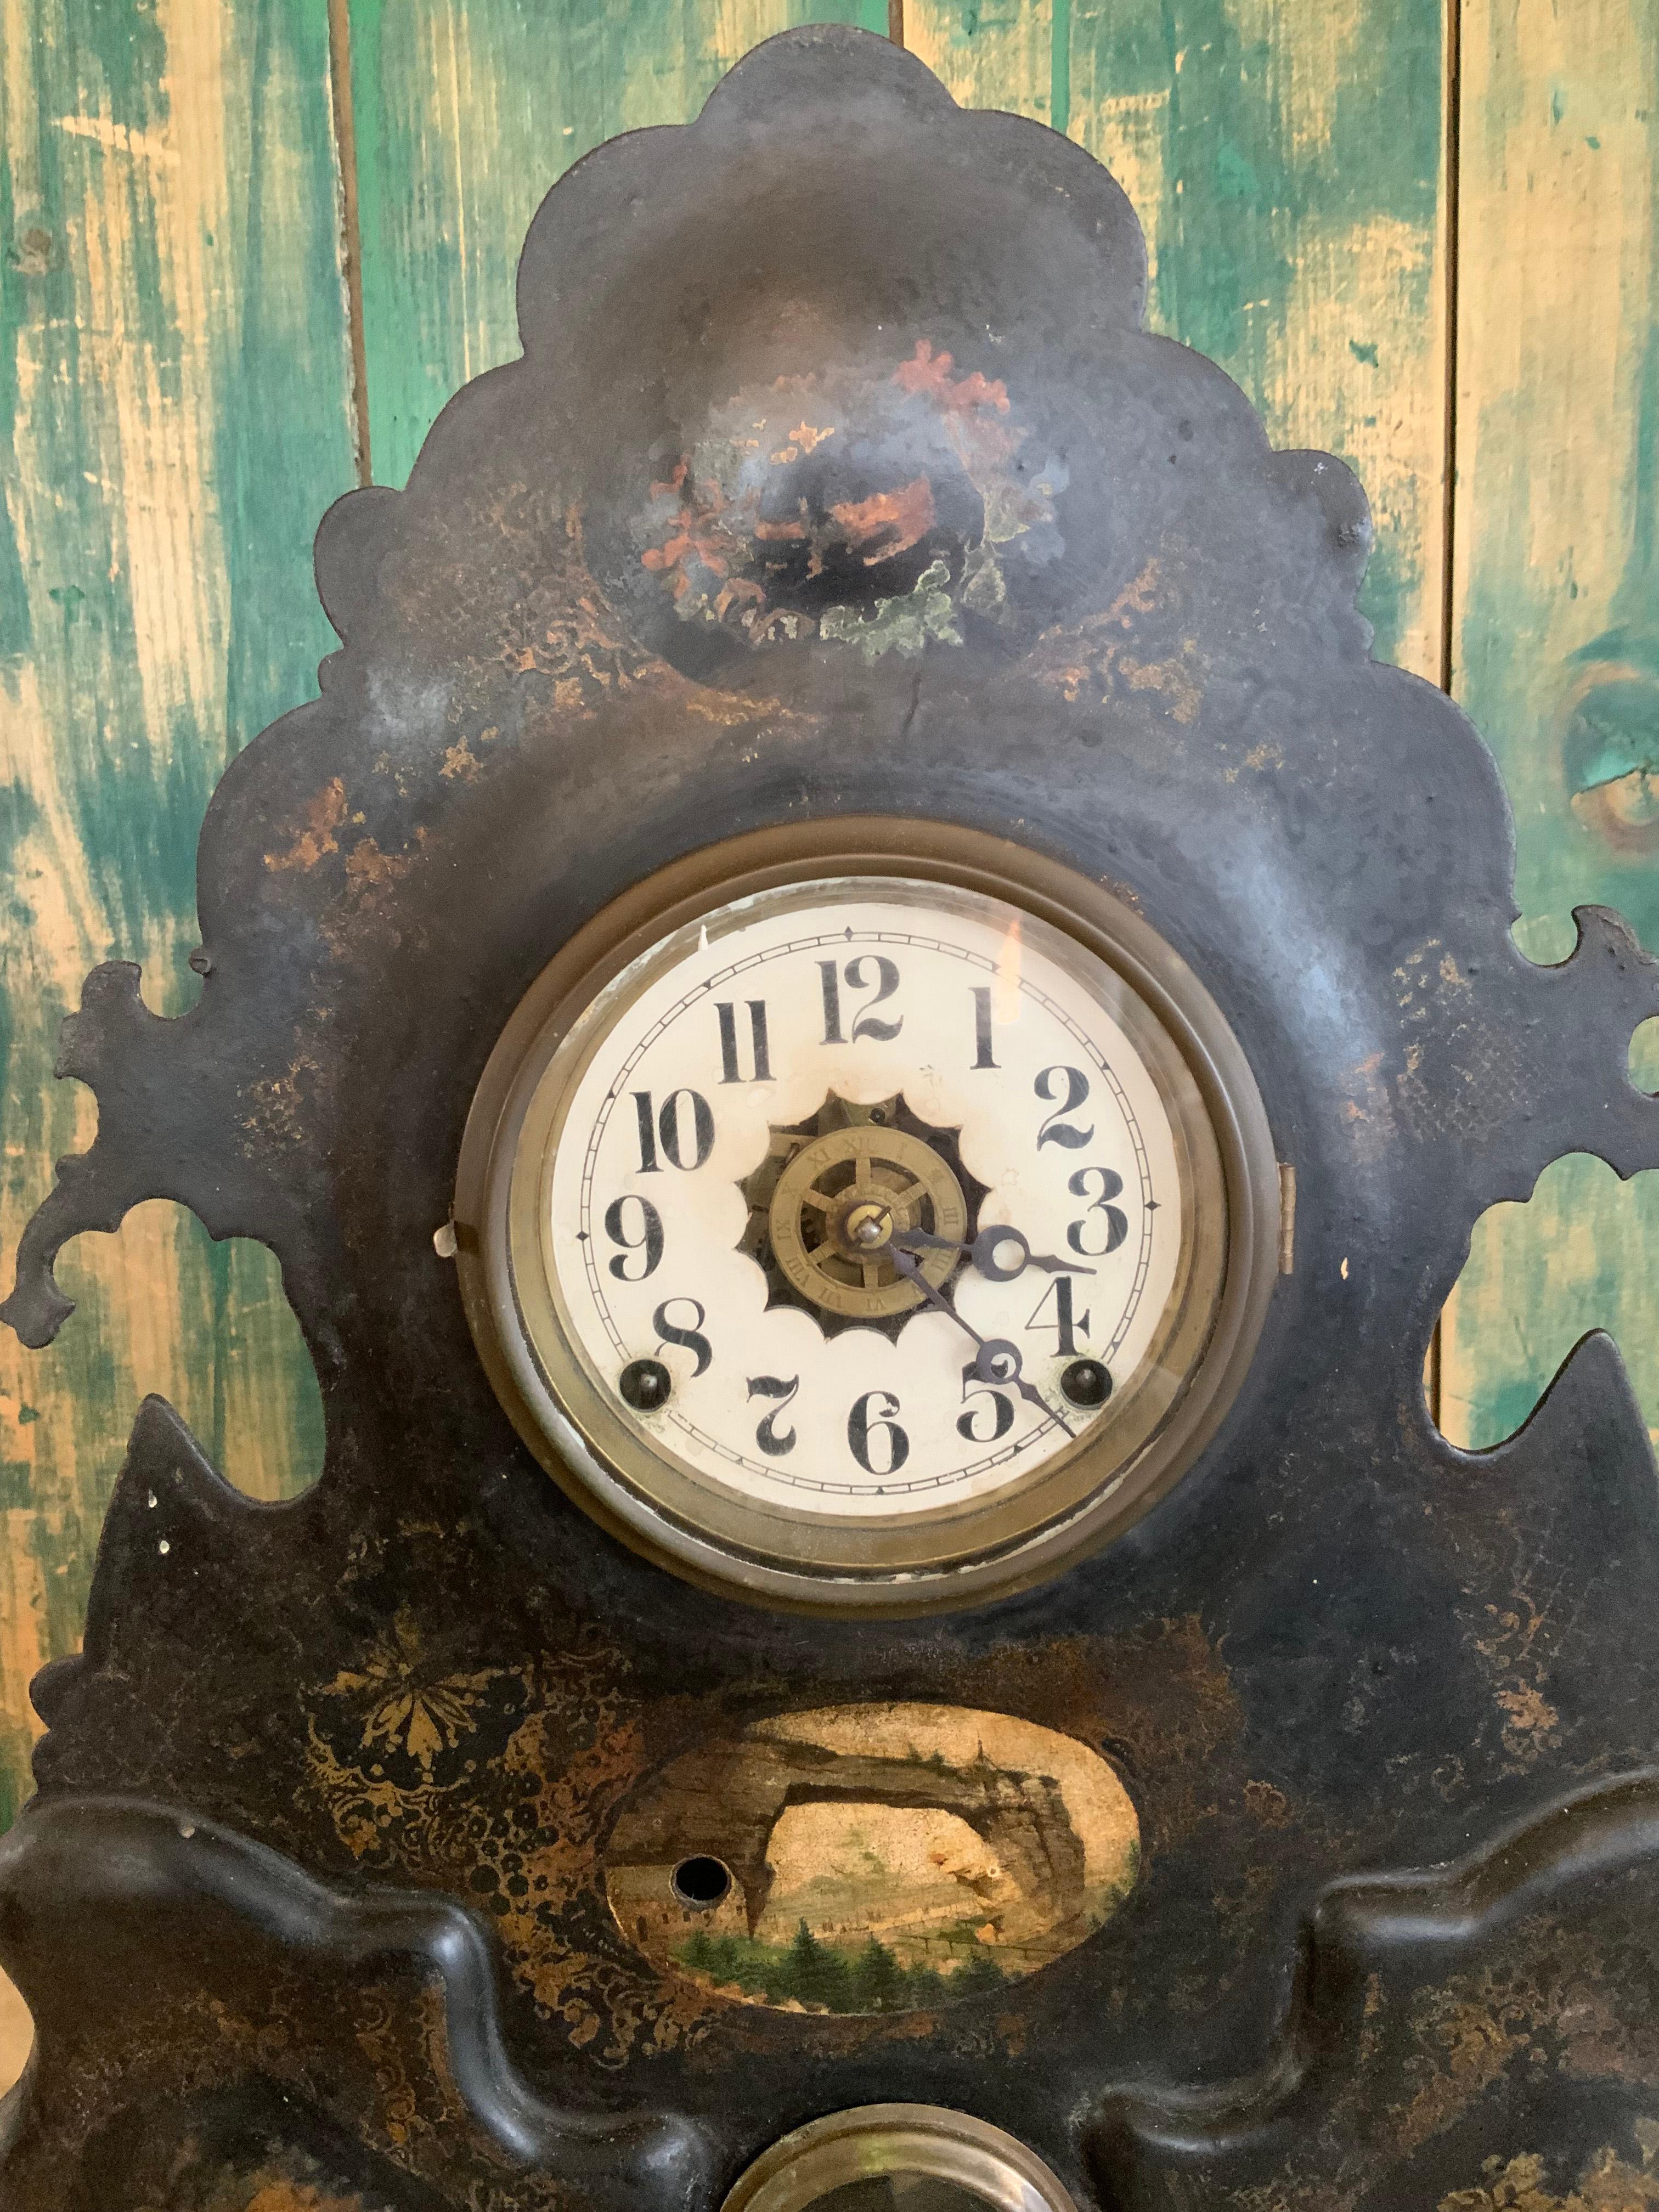 a very charming late 19th century cast iron mantel clock, with much of its original hand painted decoration, and a working mechanism, including chimes. 

wonderful scale and details, very well preserved.